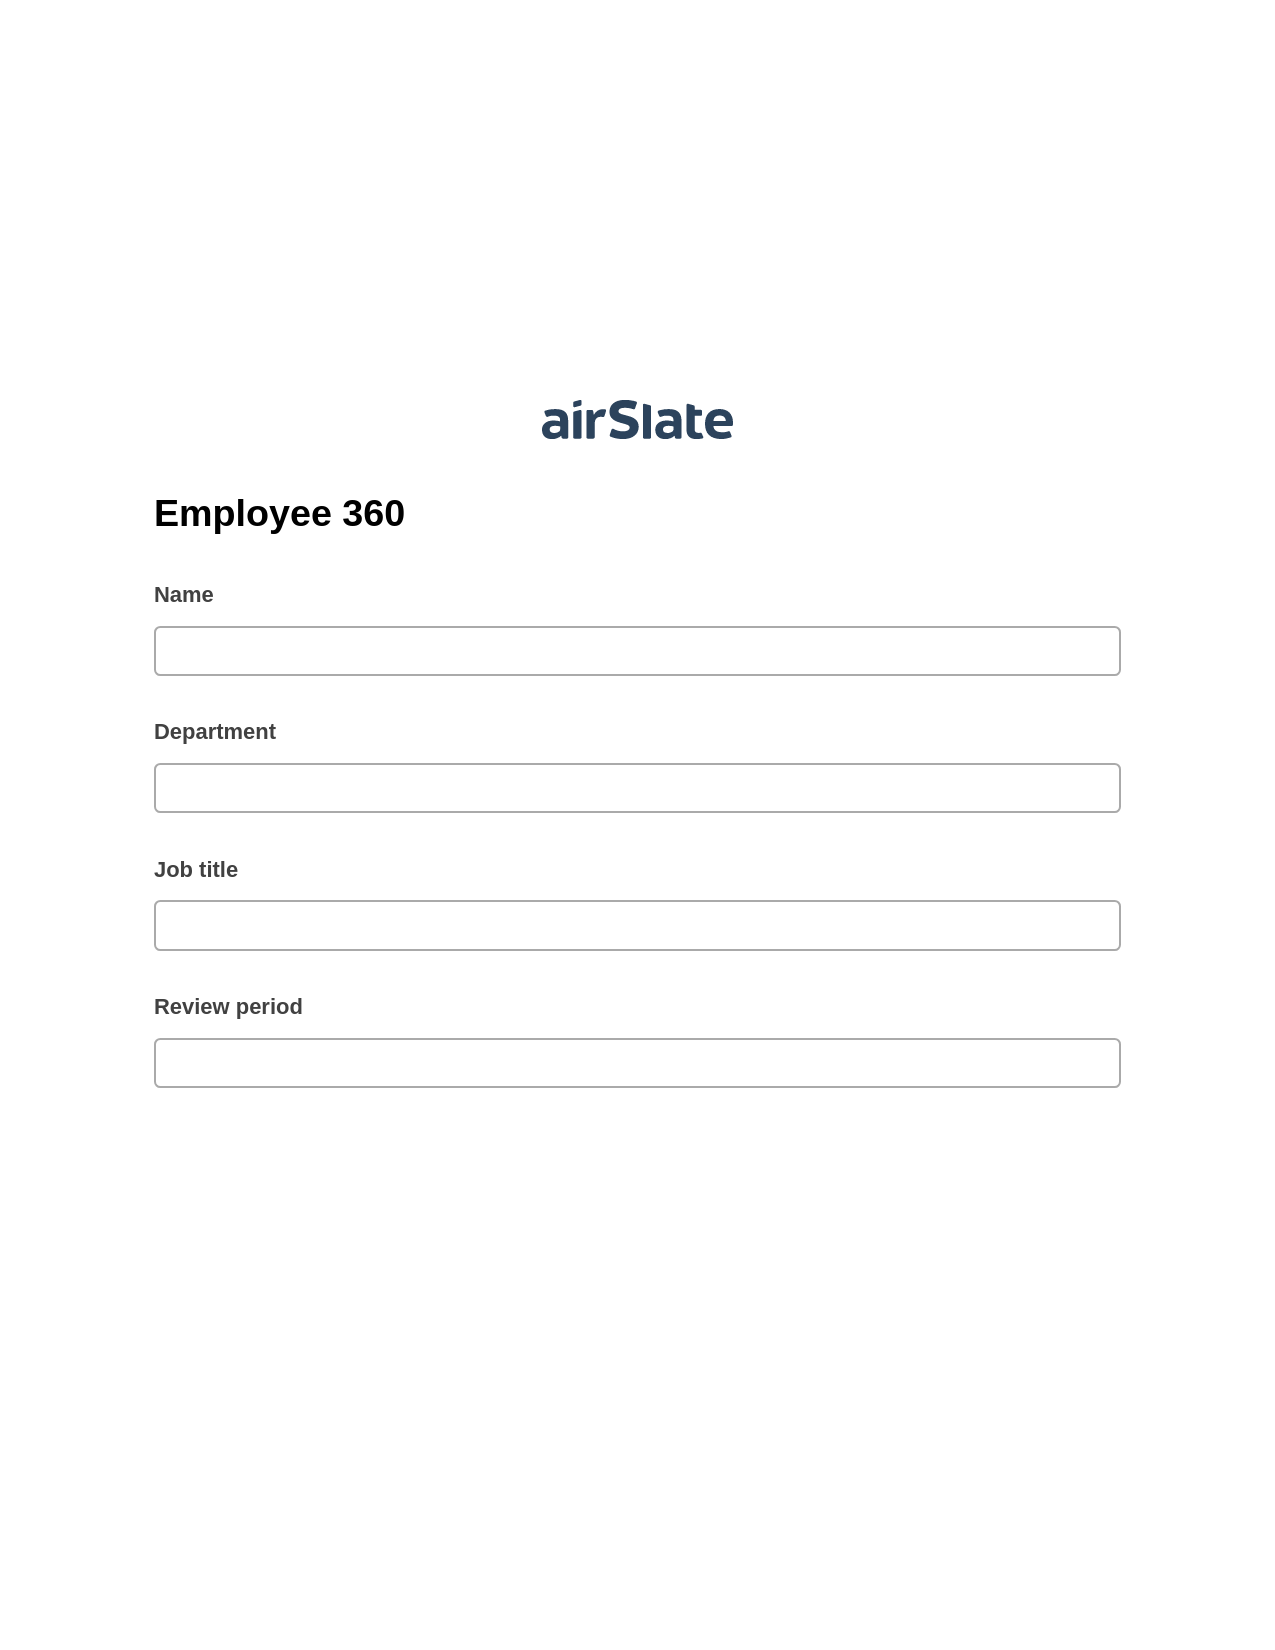 Multirole Employee 360 Pre-fill Dropdowns from Google Sheet Bot, Update MS Dynamics 365 Record Bot, Archive to Google Drive Bot